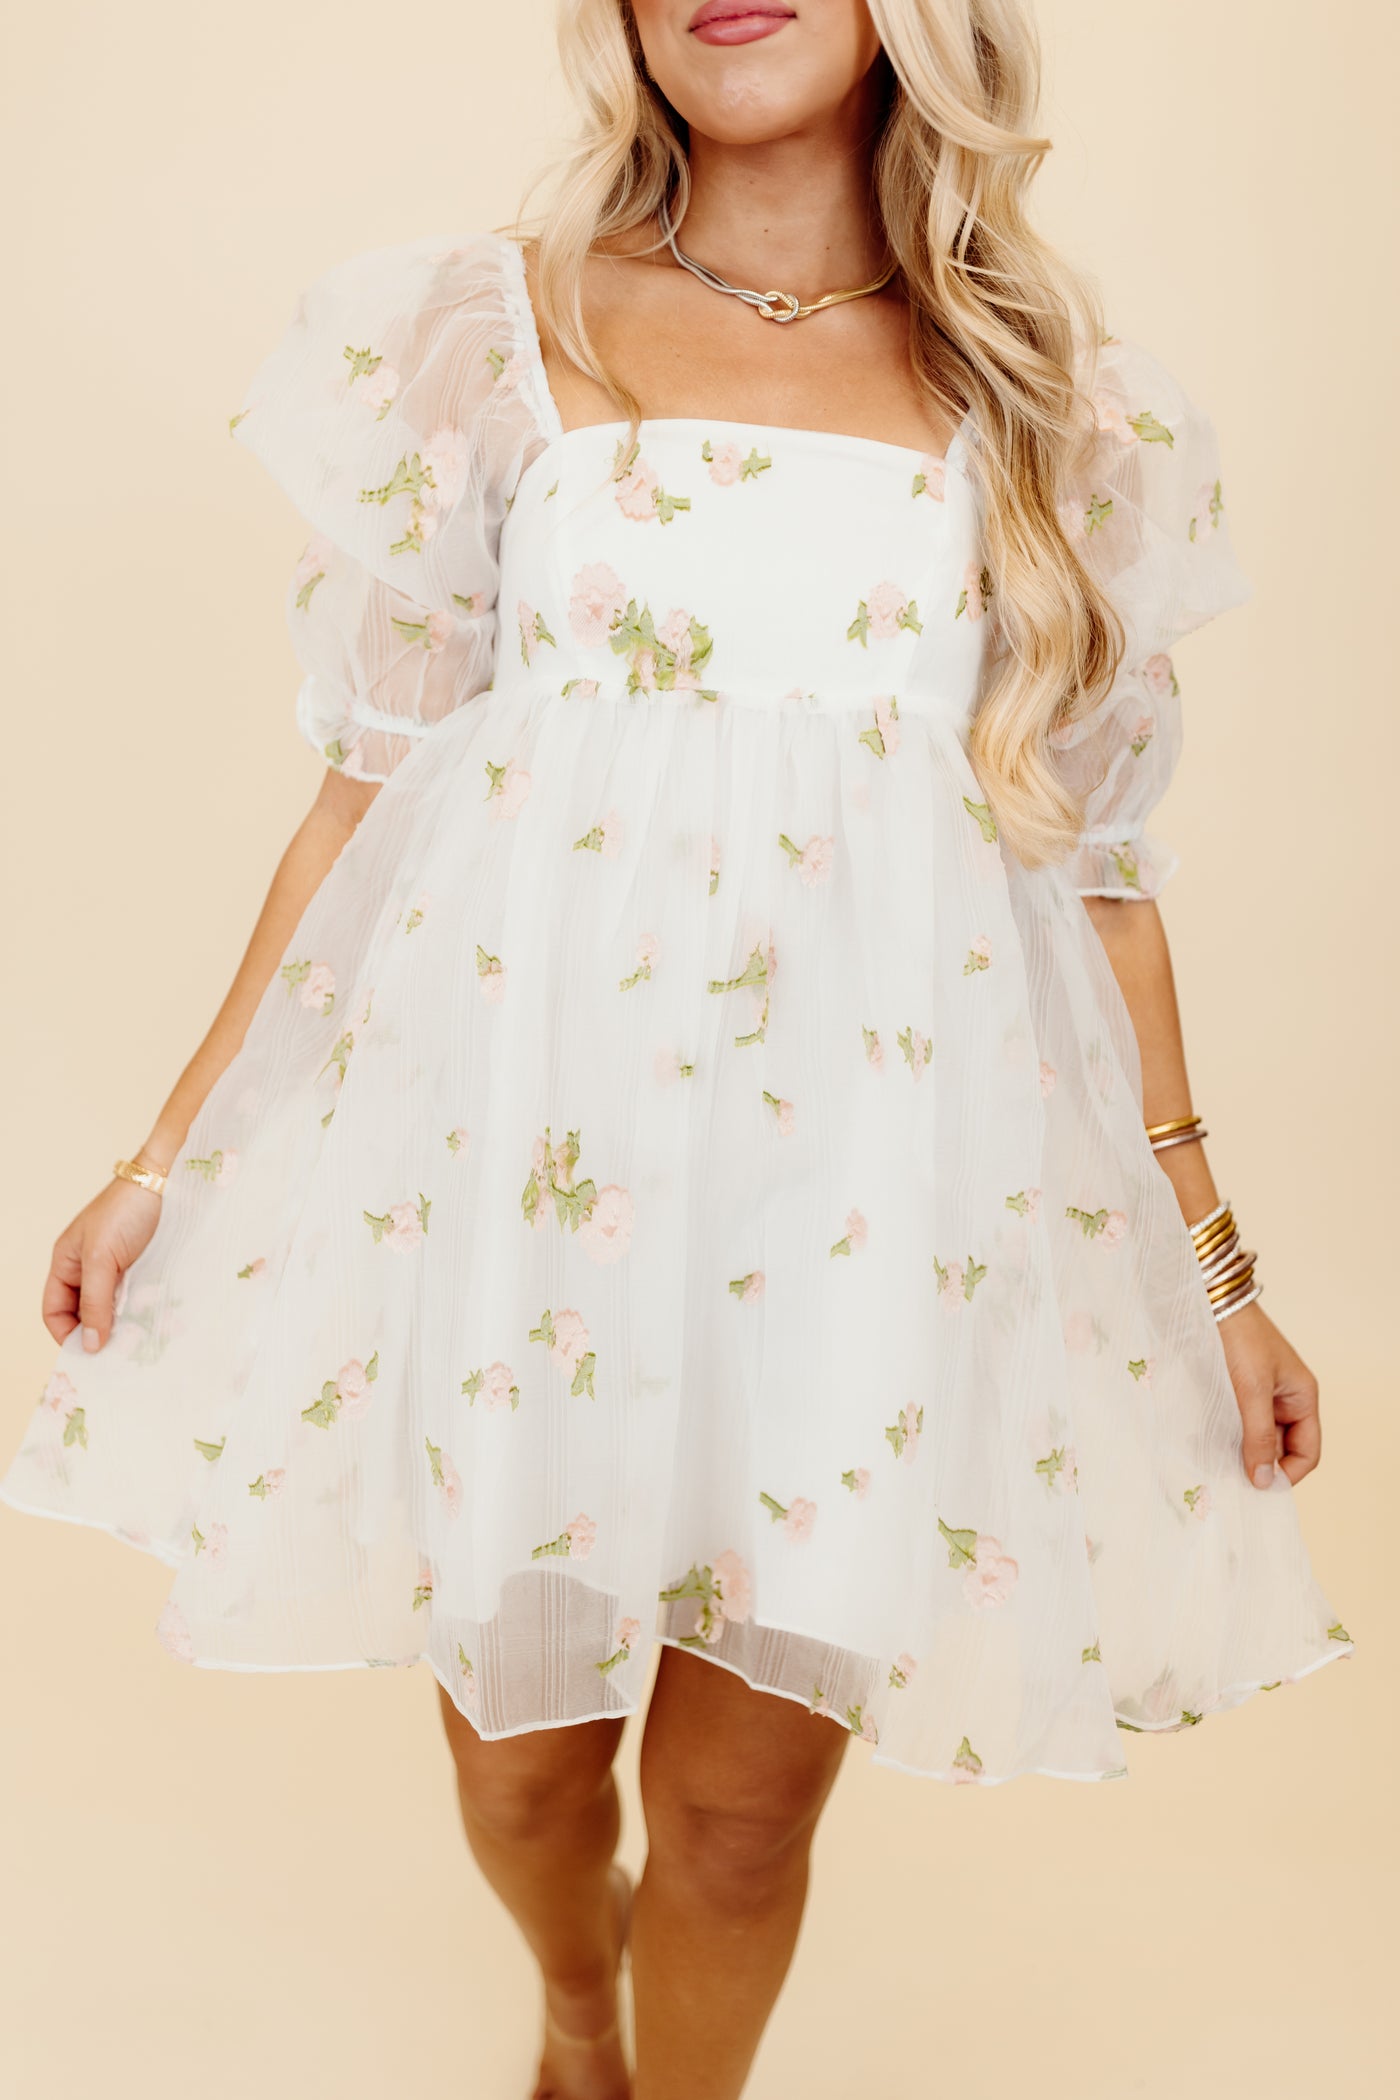 White and Pink Floral Embroidered Baby Doll Dress